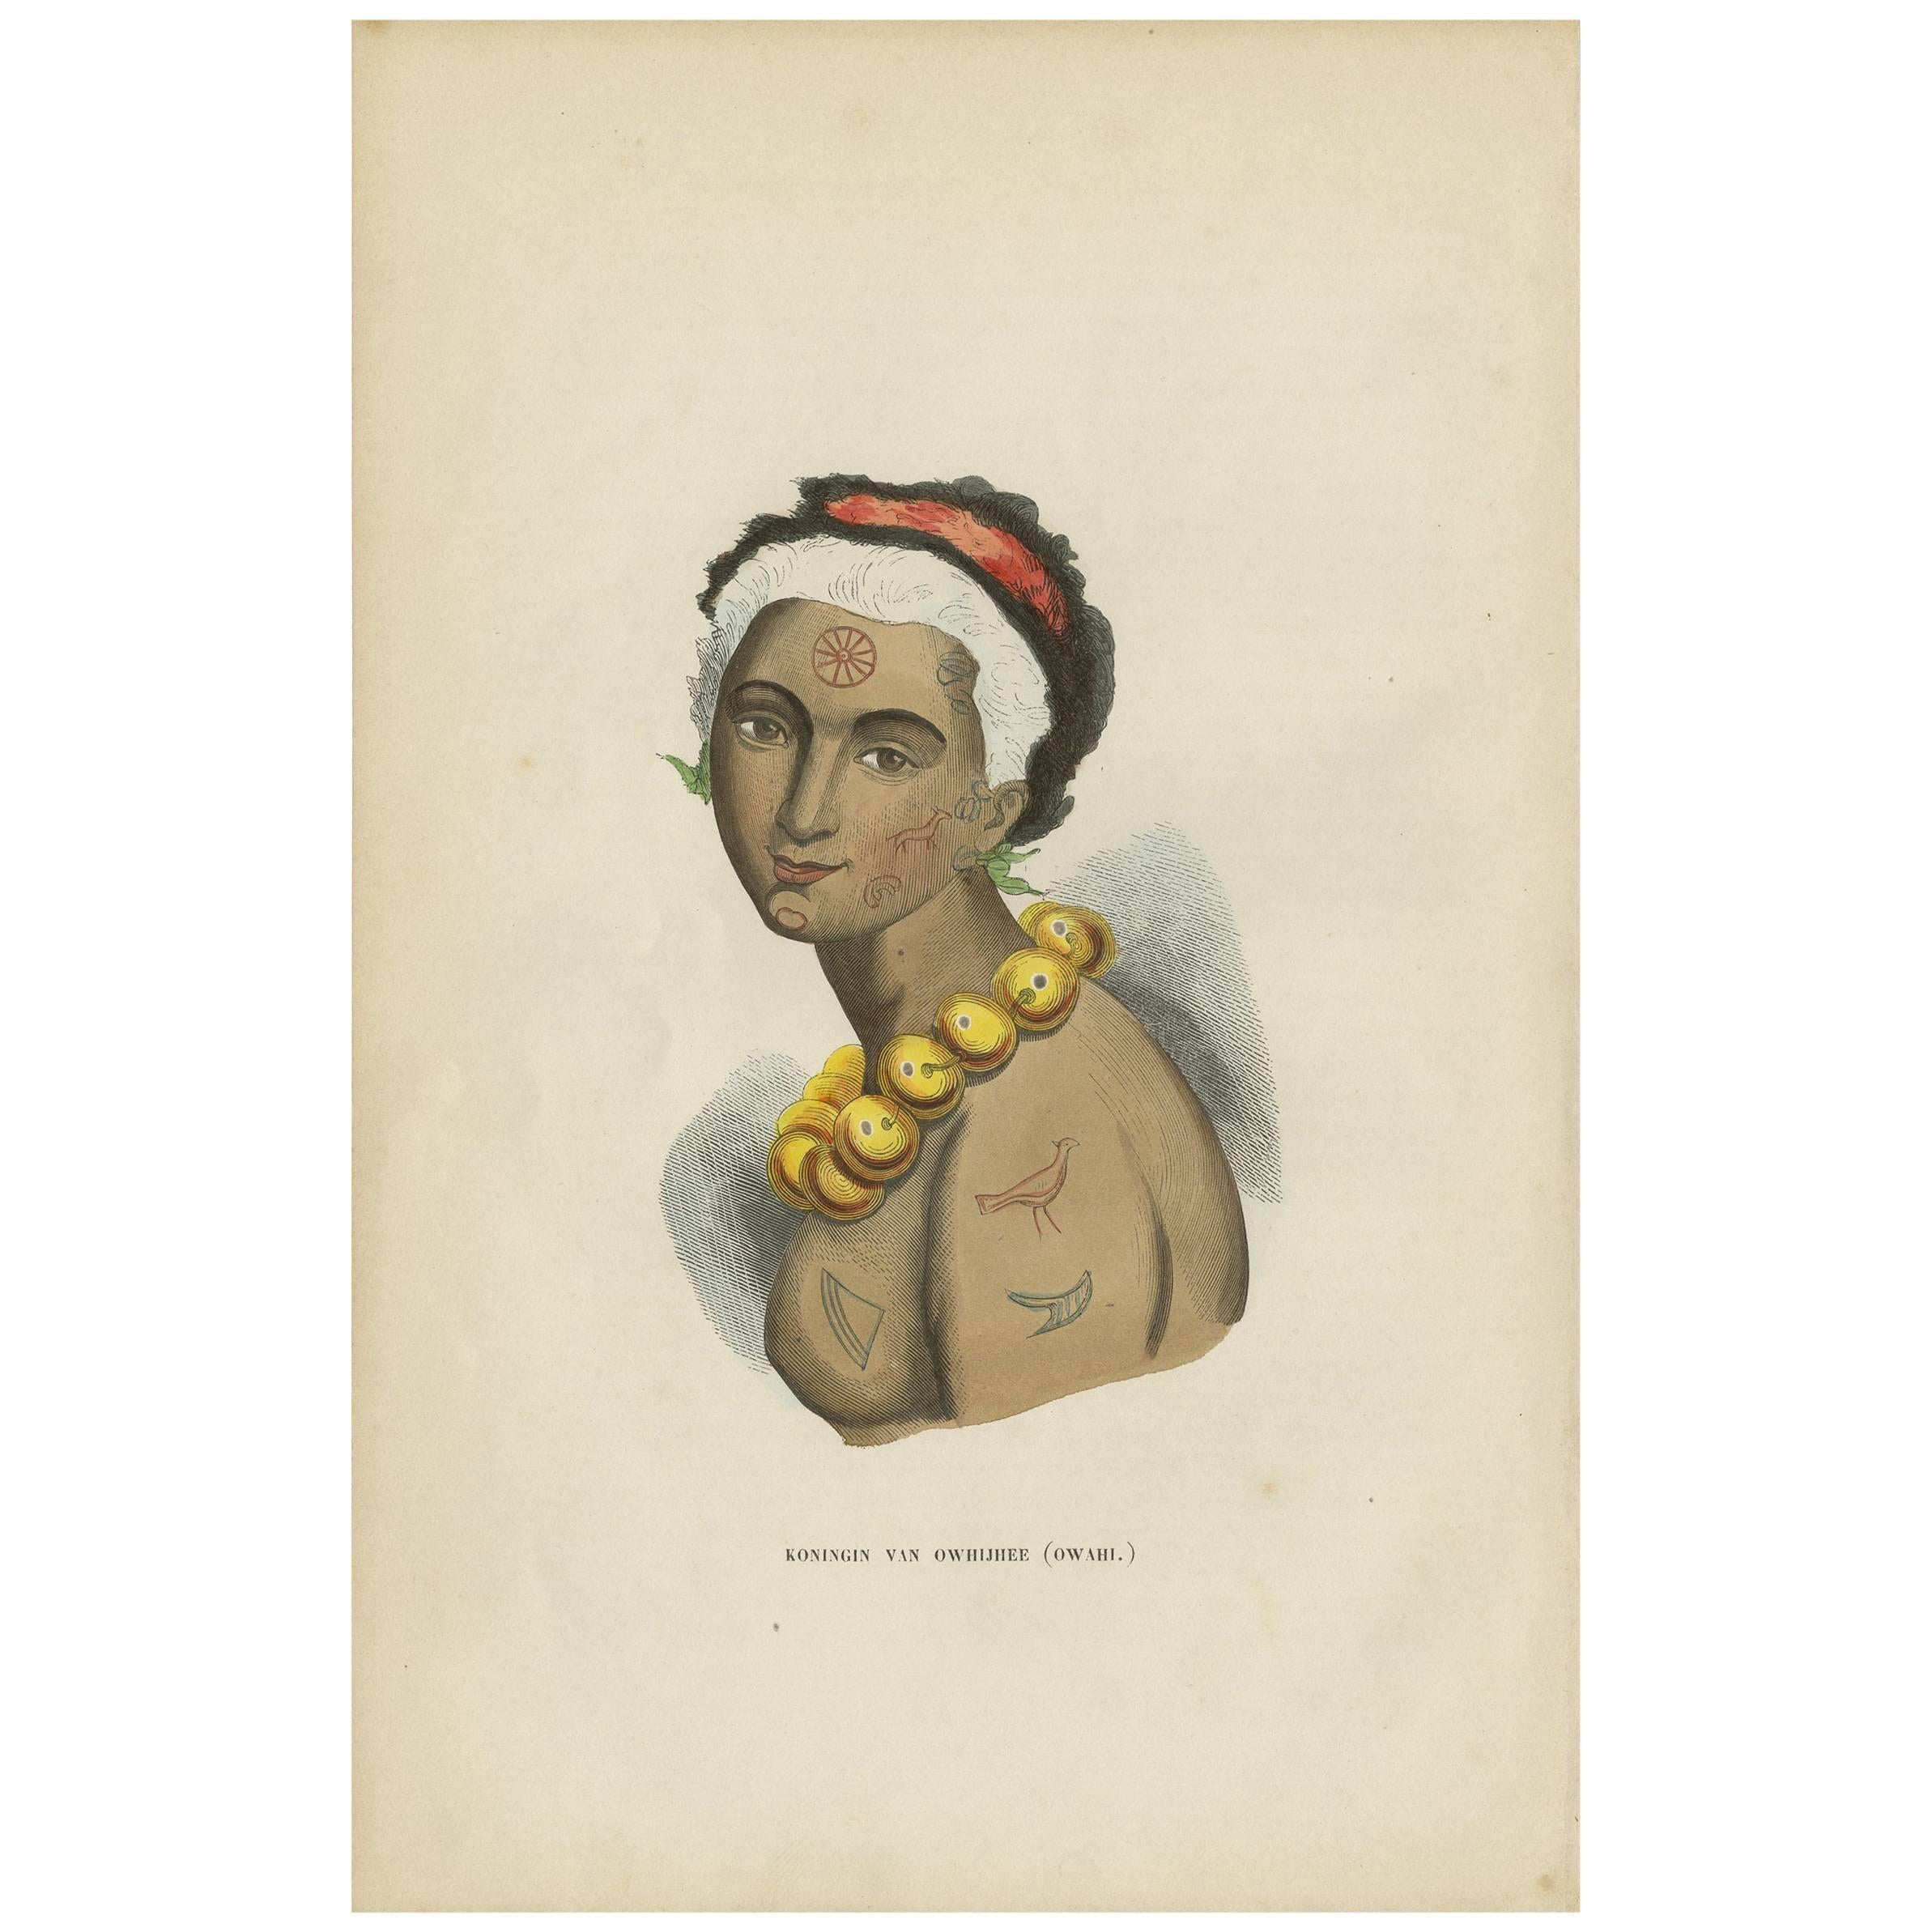 Antique Print of the Queen of Owyhee Island ‘Hawaii’ by H. Berghaus, 1855